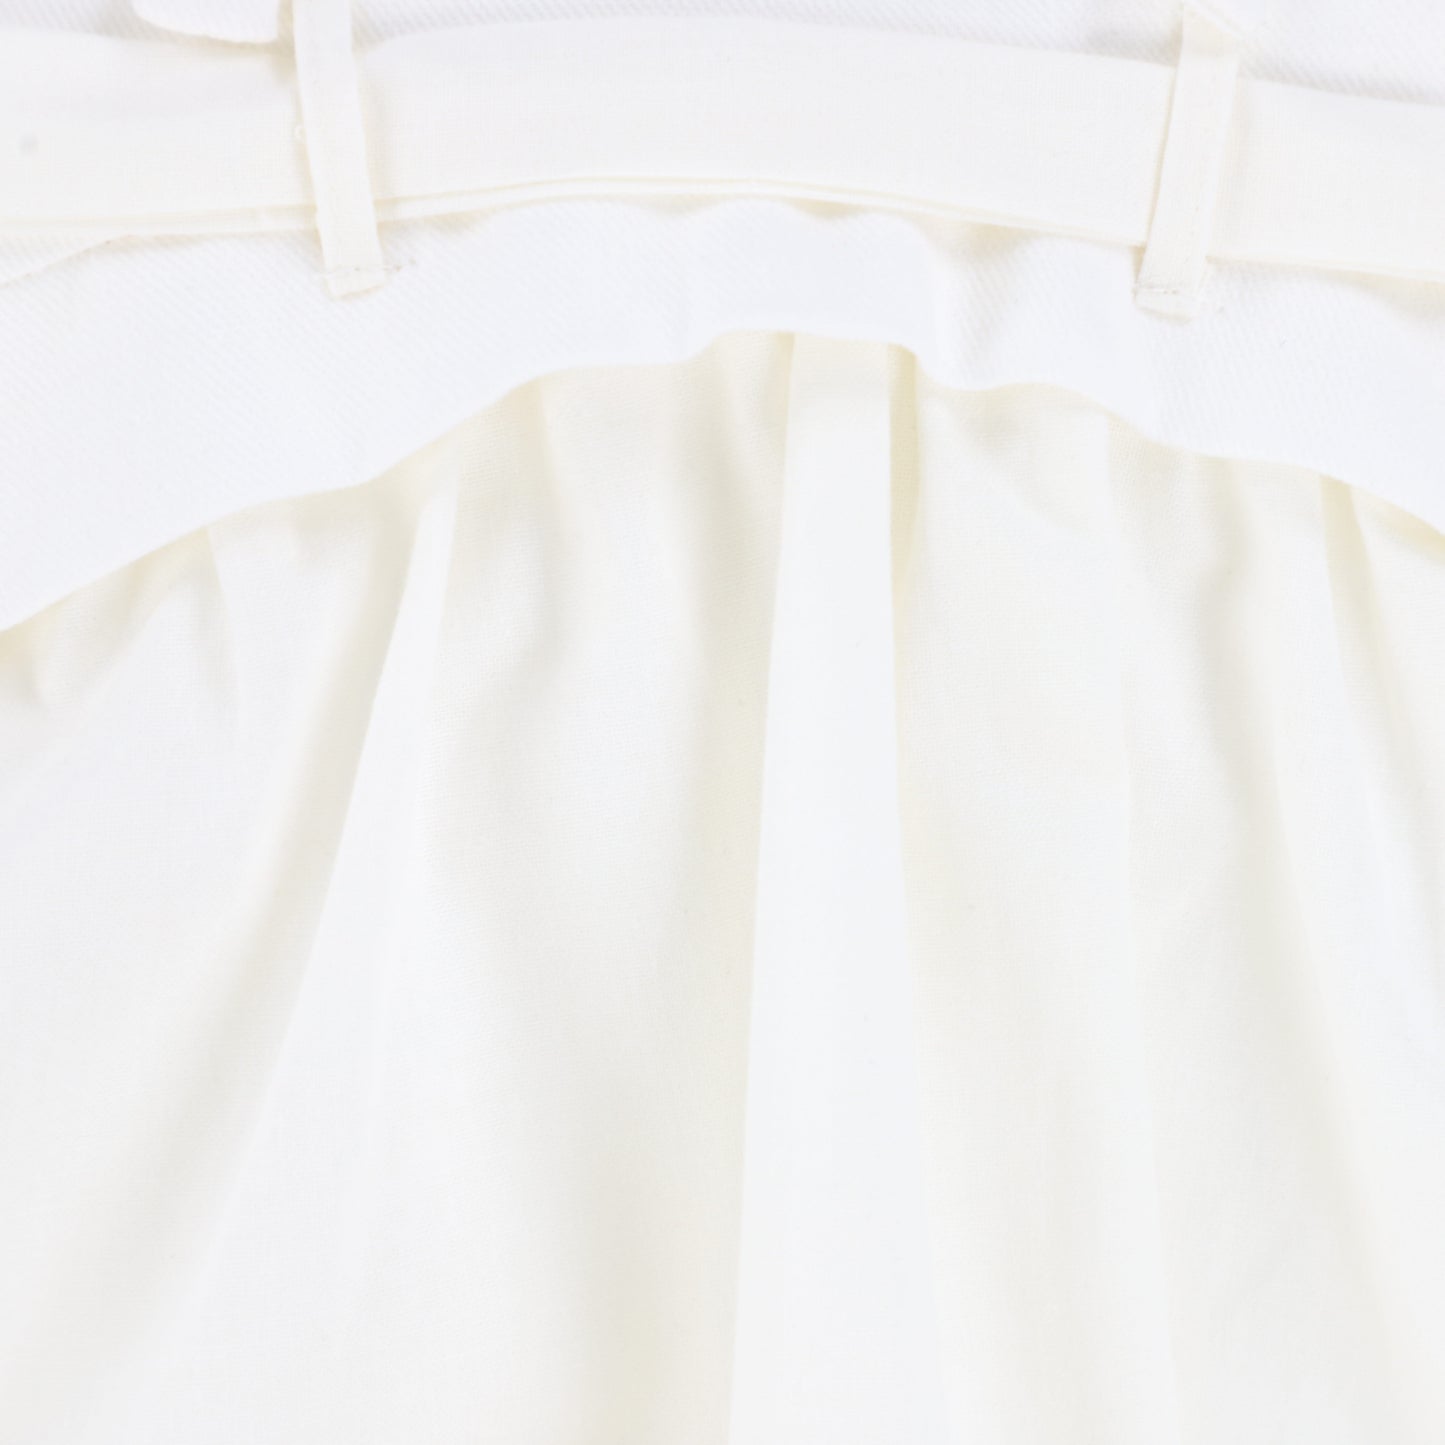 Tree House White Linen Overalls [Final Sale]